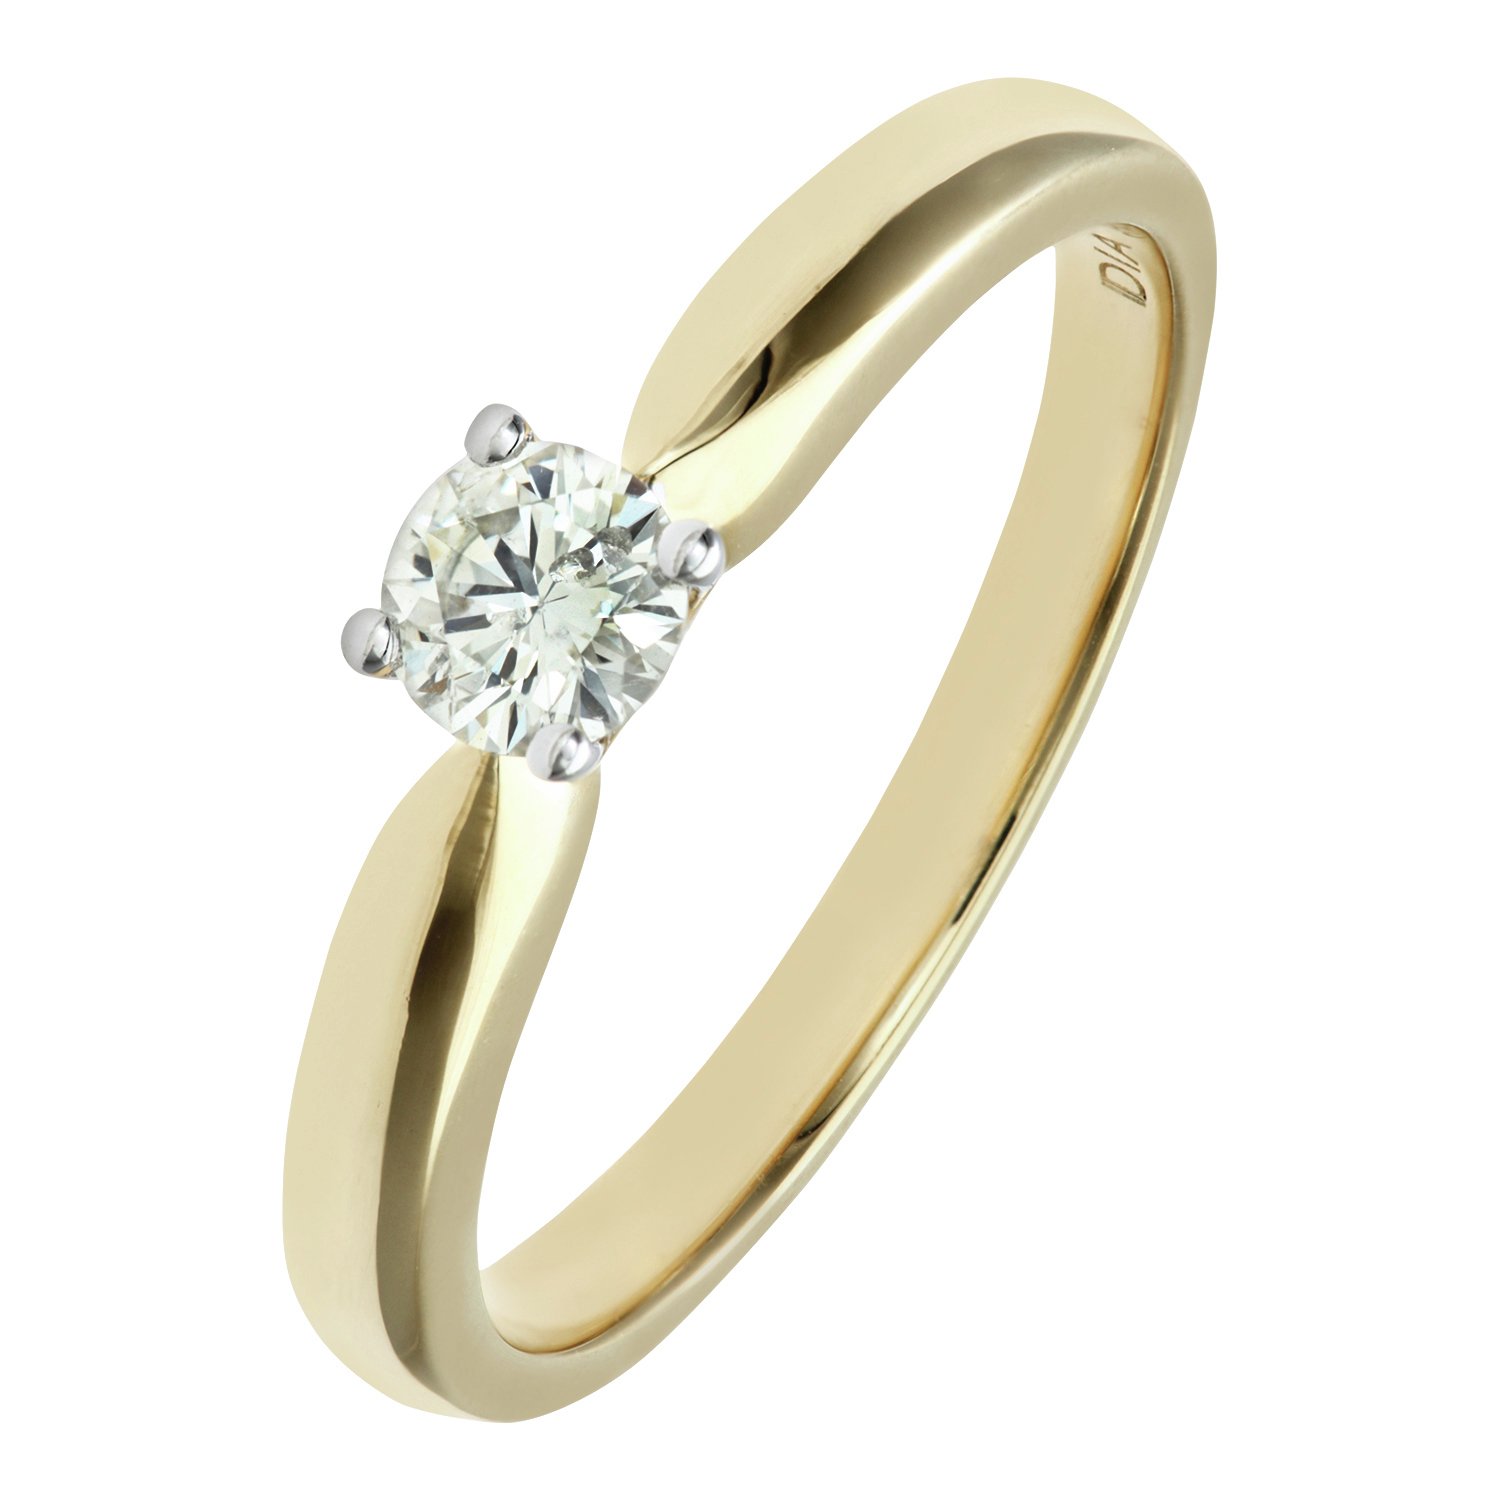 Everlasting Love 9ct Gold Diamond Solitaire Ring - Size N